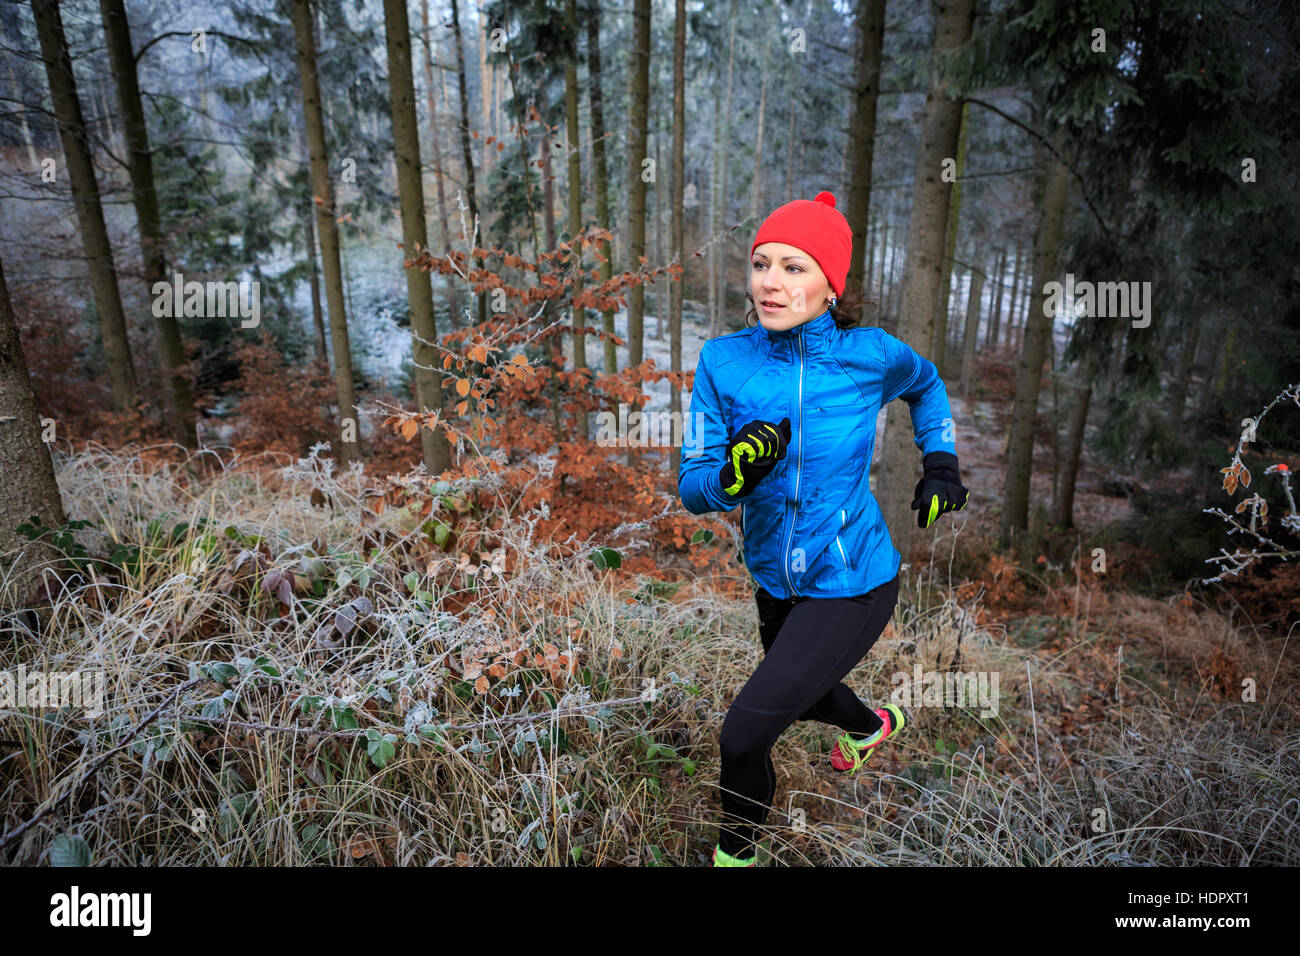 a young woman jogging in the wintry forest Stock Photo